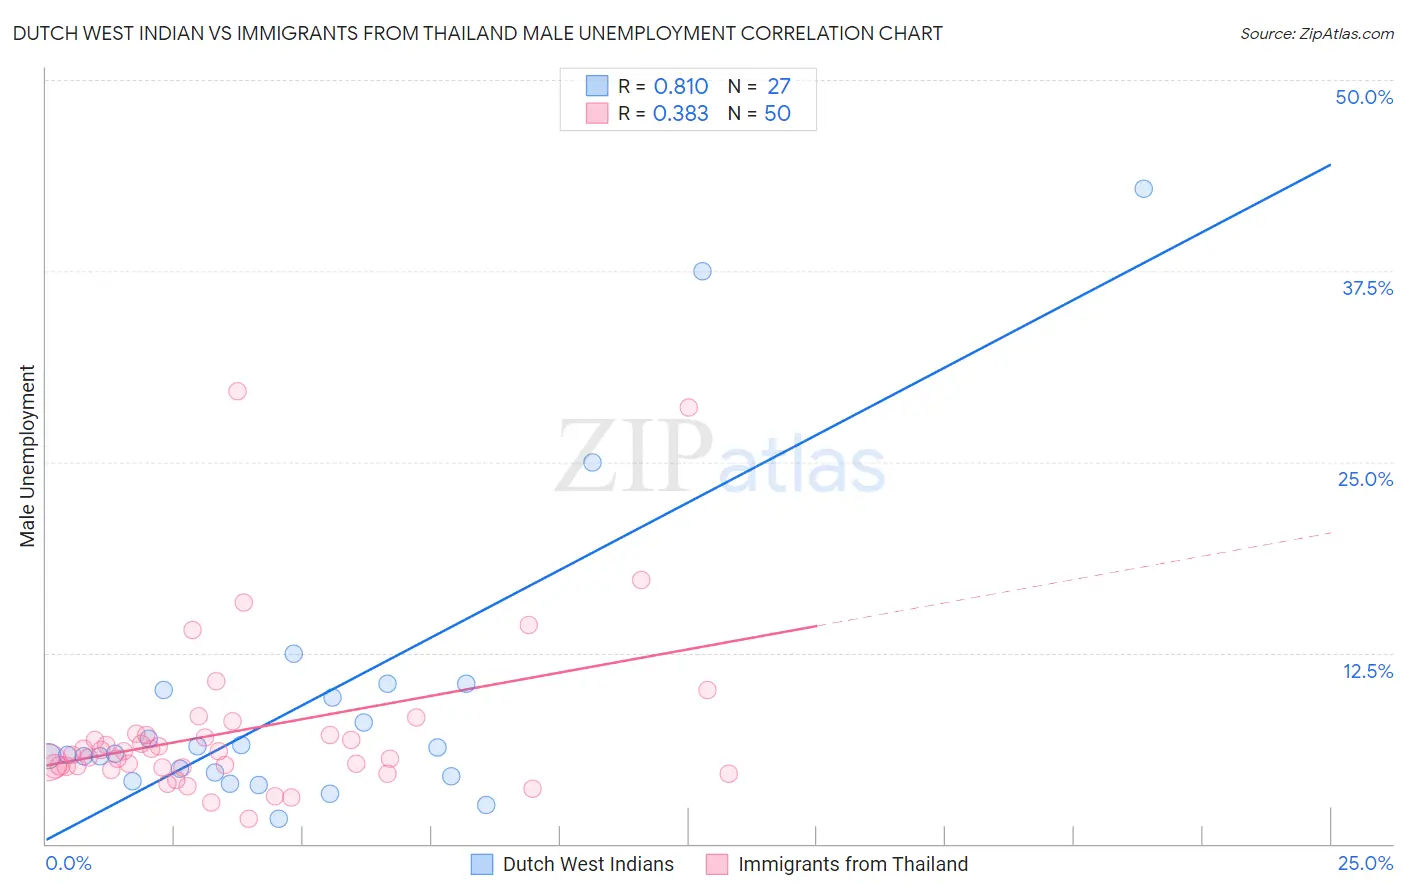 Dutch West Indian vs Immigrants from Thailand Male Unemployment